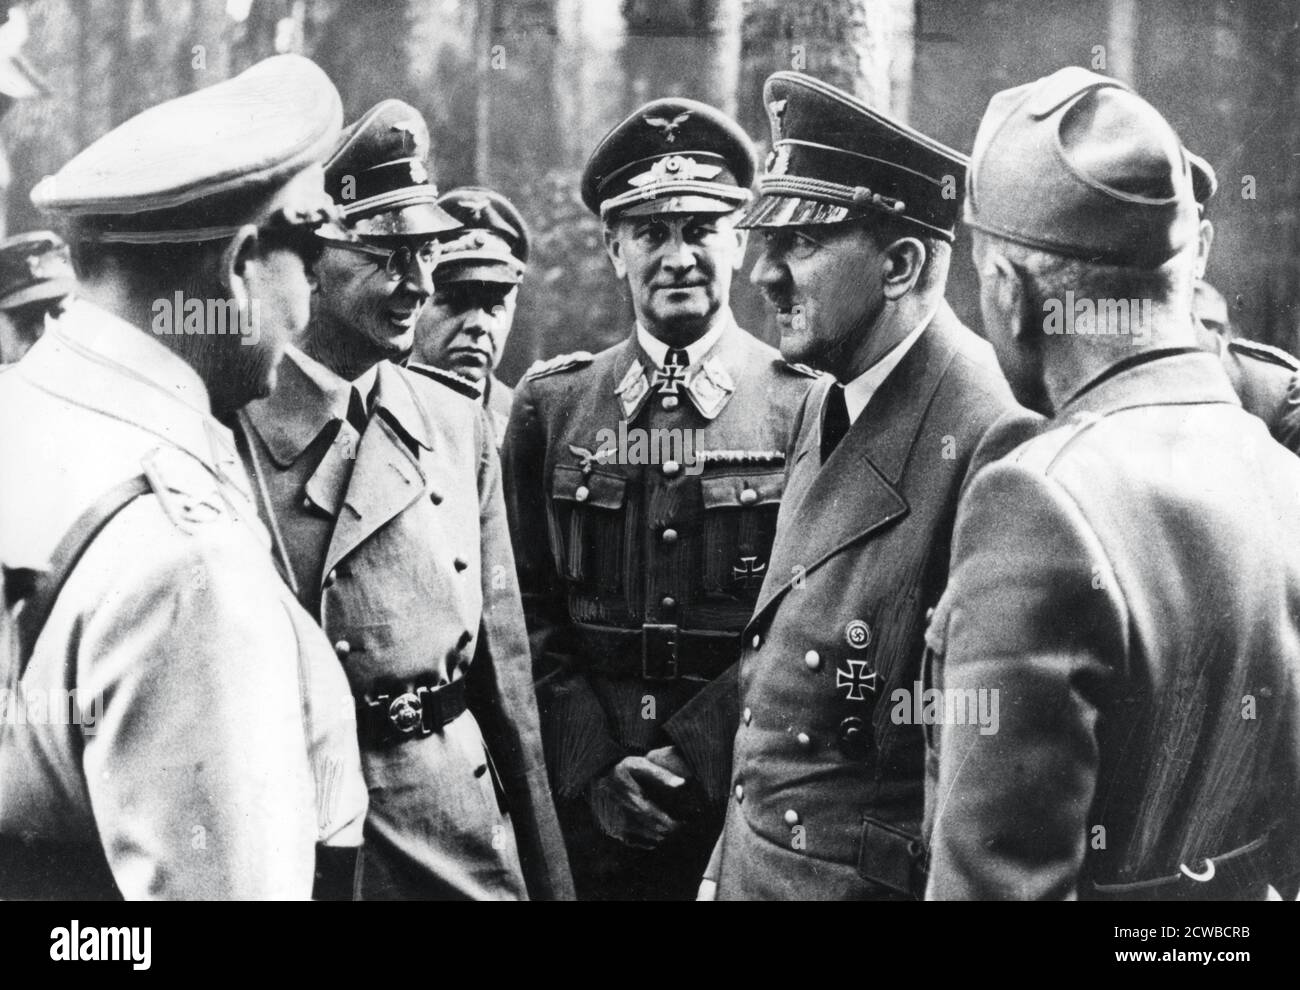 Adolf Hitler with Benito Mussolini and senior Nazis, 1944. The photograph was taken after the unsuccessful attempt on Hitler's life on 20 July 1944. Left to right: Reichsmarschall Hermann Goering, Reichsfuhrer Heinrich Himmler, Colonel General Loerzer, Hitler, Mussolini. The photographer is unknown. Stock Photo